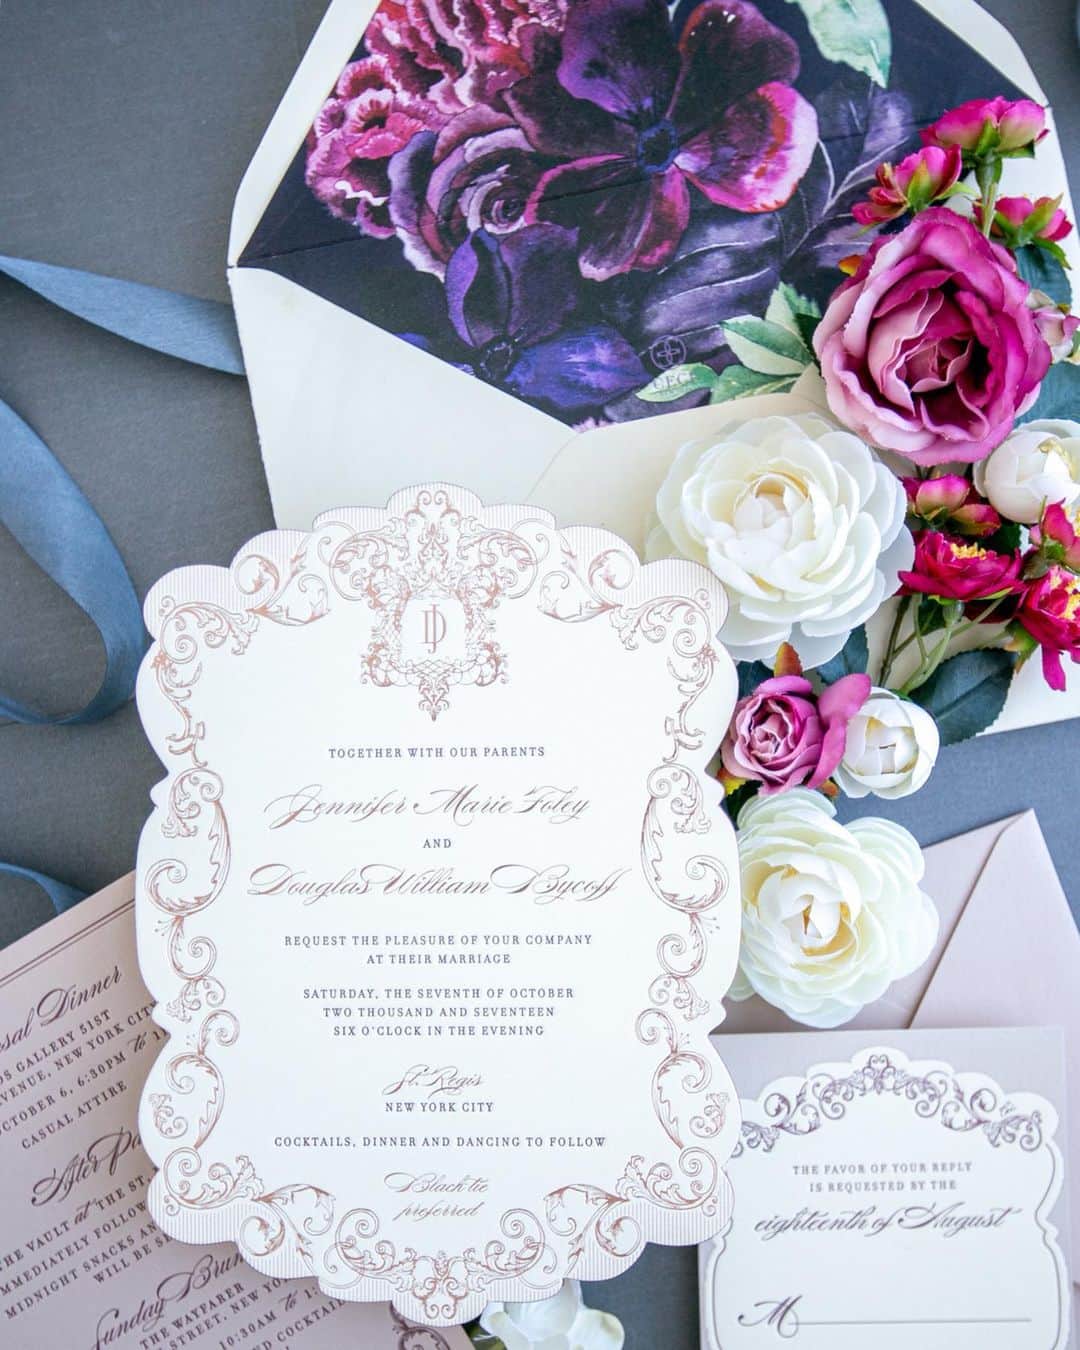 Ceci Johnsonのインスタグラム：「Echoing the purple flora at the wedding reception planned by @jesgordon, our couture invitation is crafted with hand-painted watercolors and graced with delicate copper foil details. If you’re looking for a purple-themed wedding with an invitation to match, explore the Violet Celine collection at cecinewyork.com and let your wedding dreams unfold in style.  #CeciCouture ⠀⠀⠀⠀⠀⠀⠀⠀⠀ CREATIVE PARTNERS: Stationery: @cecinewyork Planner & Event Designer: @jesgordon ⠀⠀⠀⠀⠀⠀⠀⠀⠀ #cecinewyork #ceciwedding #elegantinvitations  #floral #watercolor #luxurystationery #weddinginspiration #purpleflowers #weddingstationerydesigner」